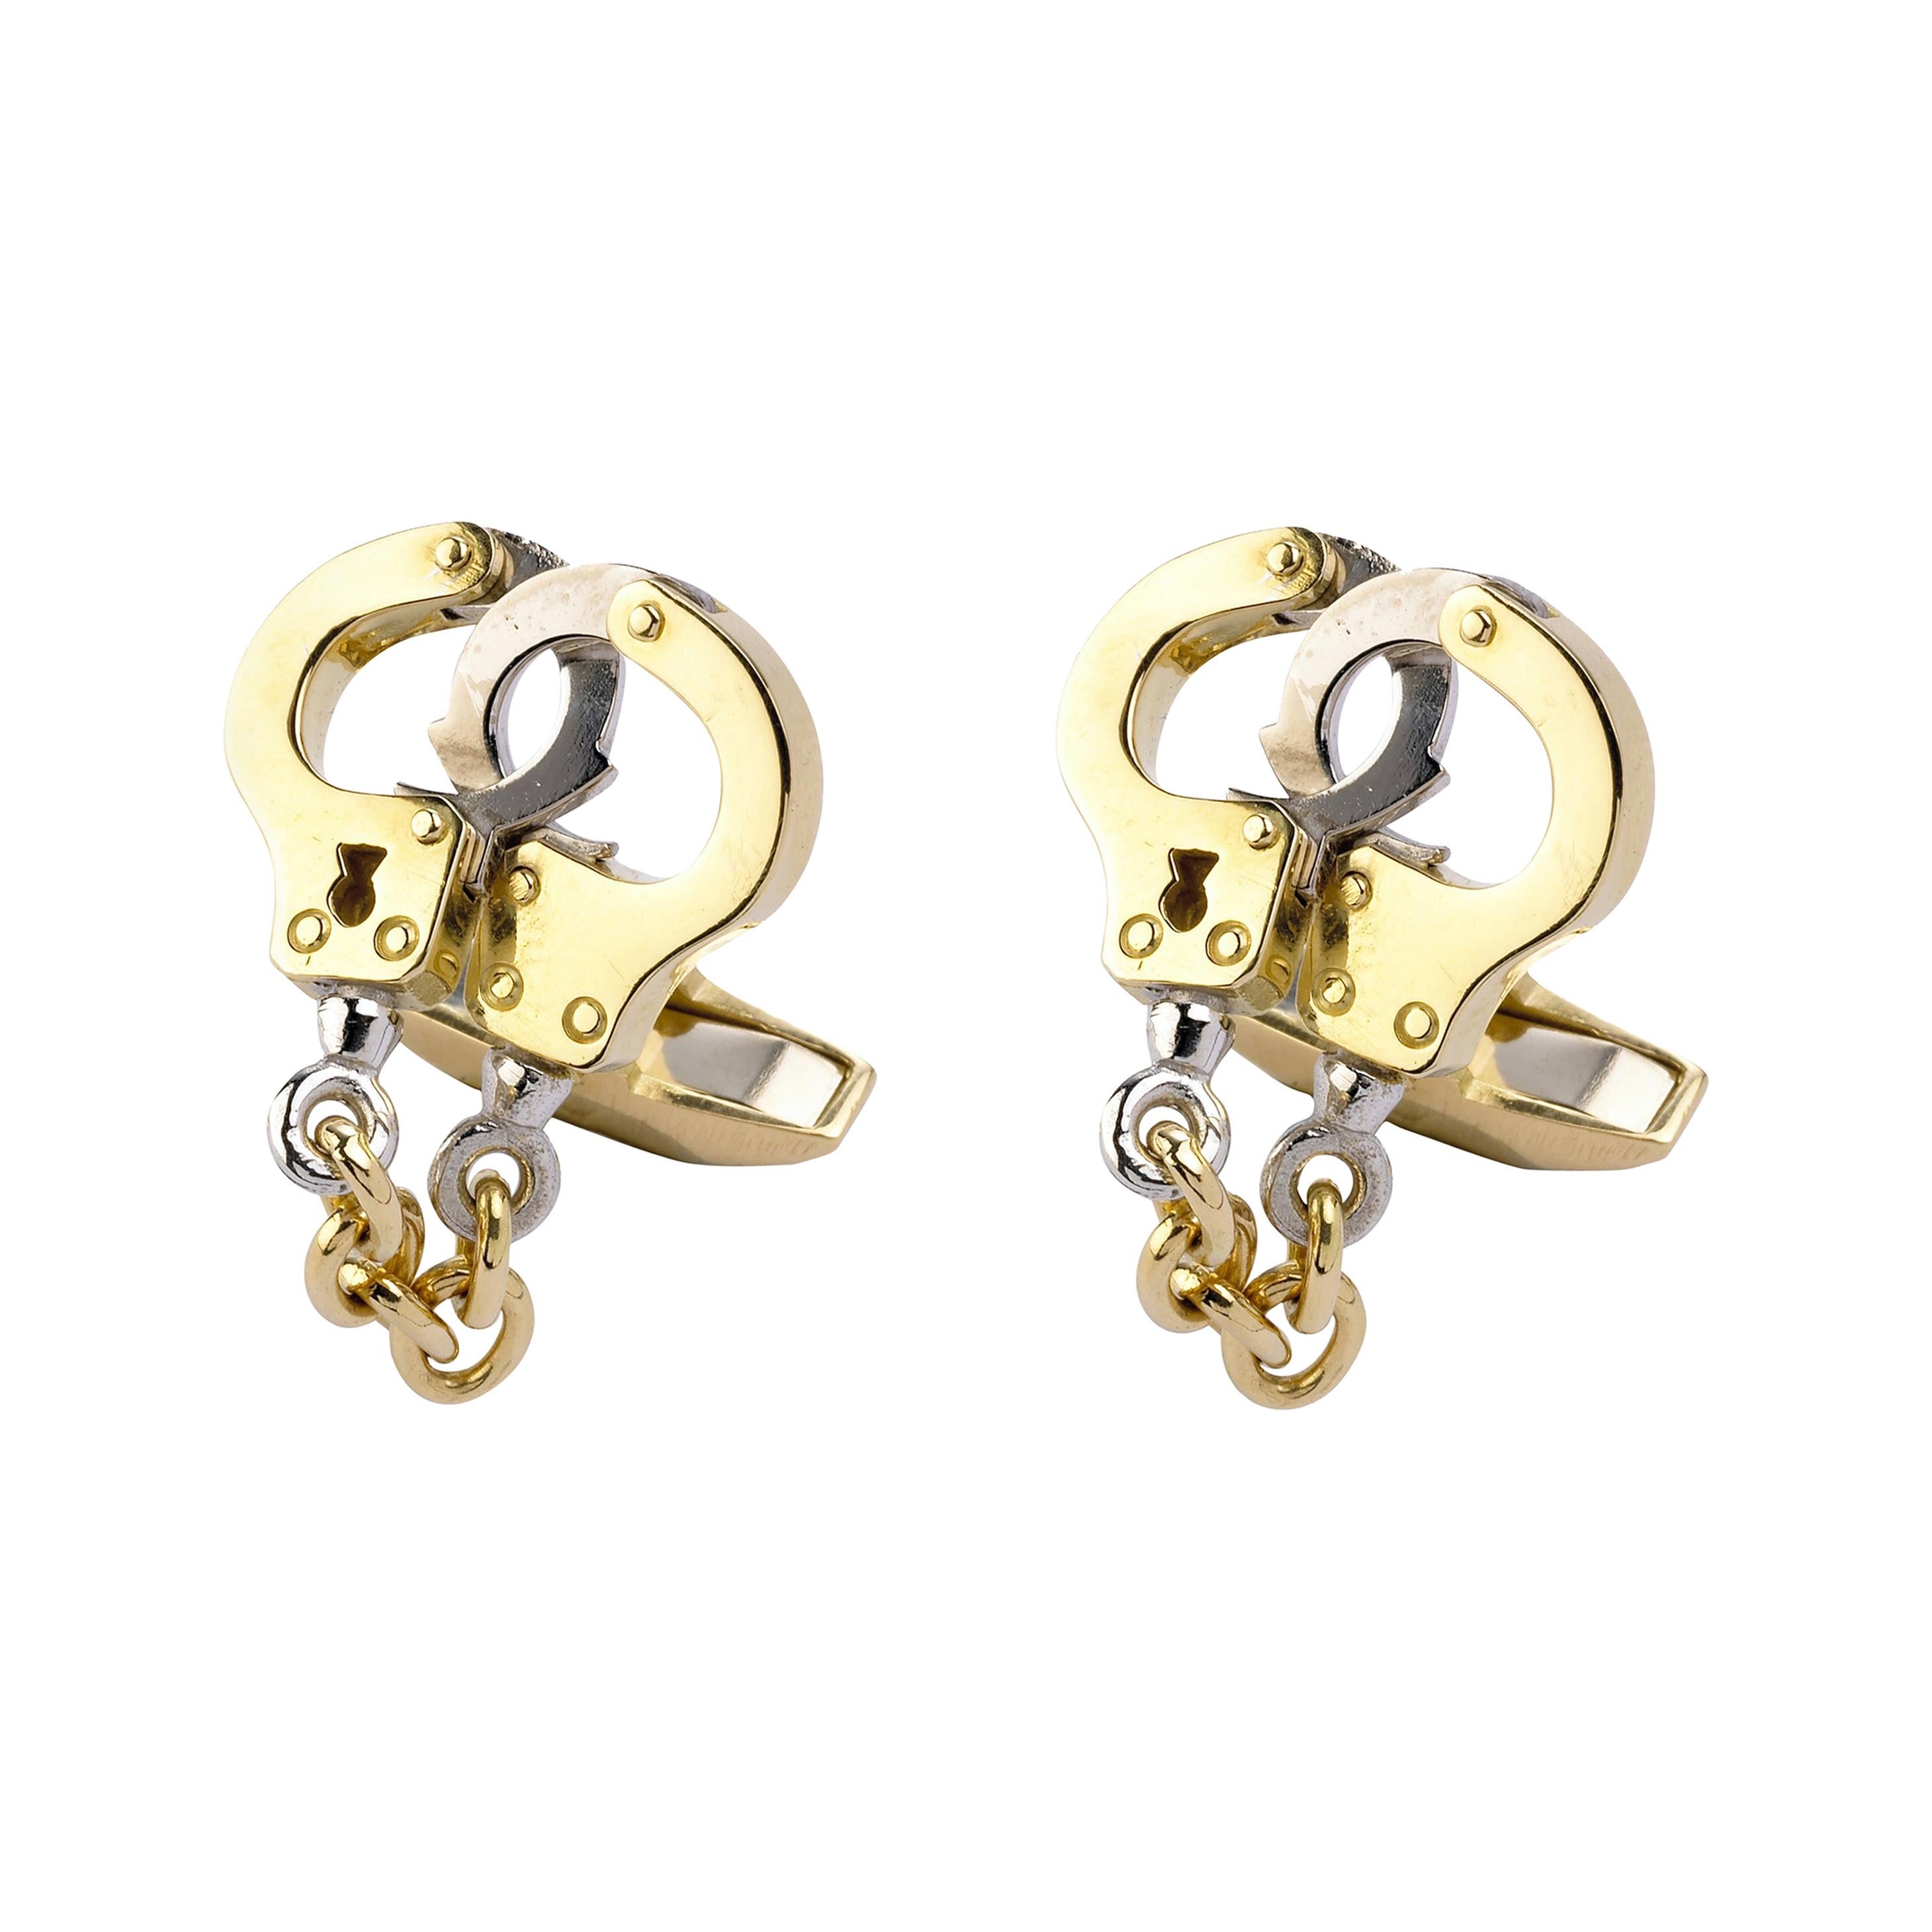 Deakin & Francis 18 Karat Yellow and White Gold Handcuff Cufflinks For Sale